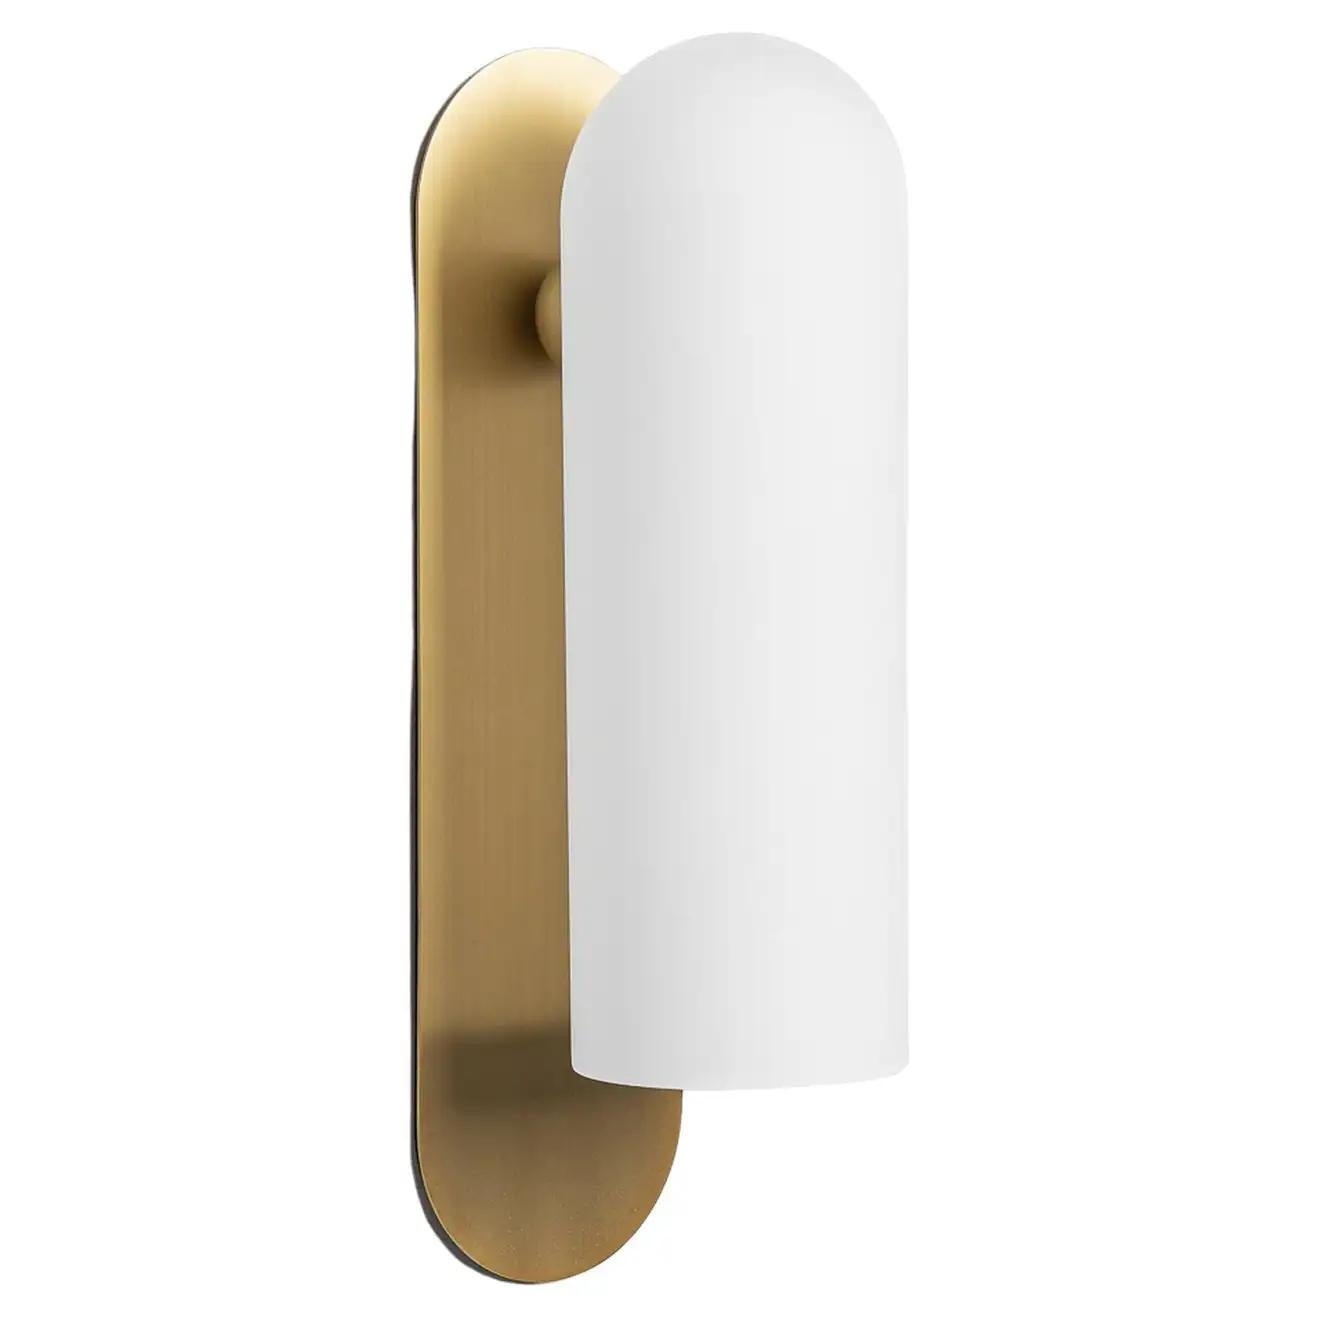 Odyssey LG brass wall sconce by Schwung
Dimensions: W 10.5 x D 14 x H 38 cm
Materials: Brass, frosted glass

Finishes available: Black gunmetal, polished nickel, brass

Schwung is a German word, and loosely defined, means energy or momentumm